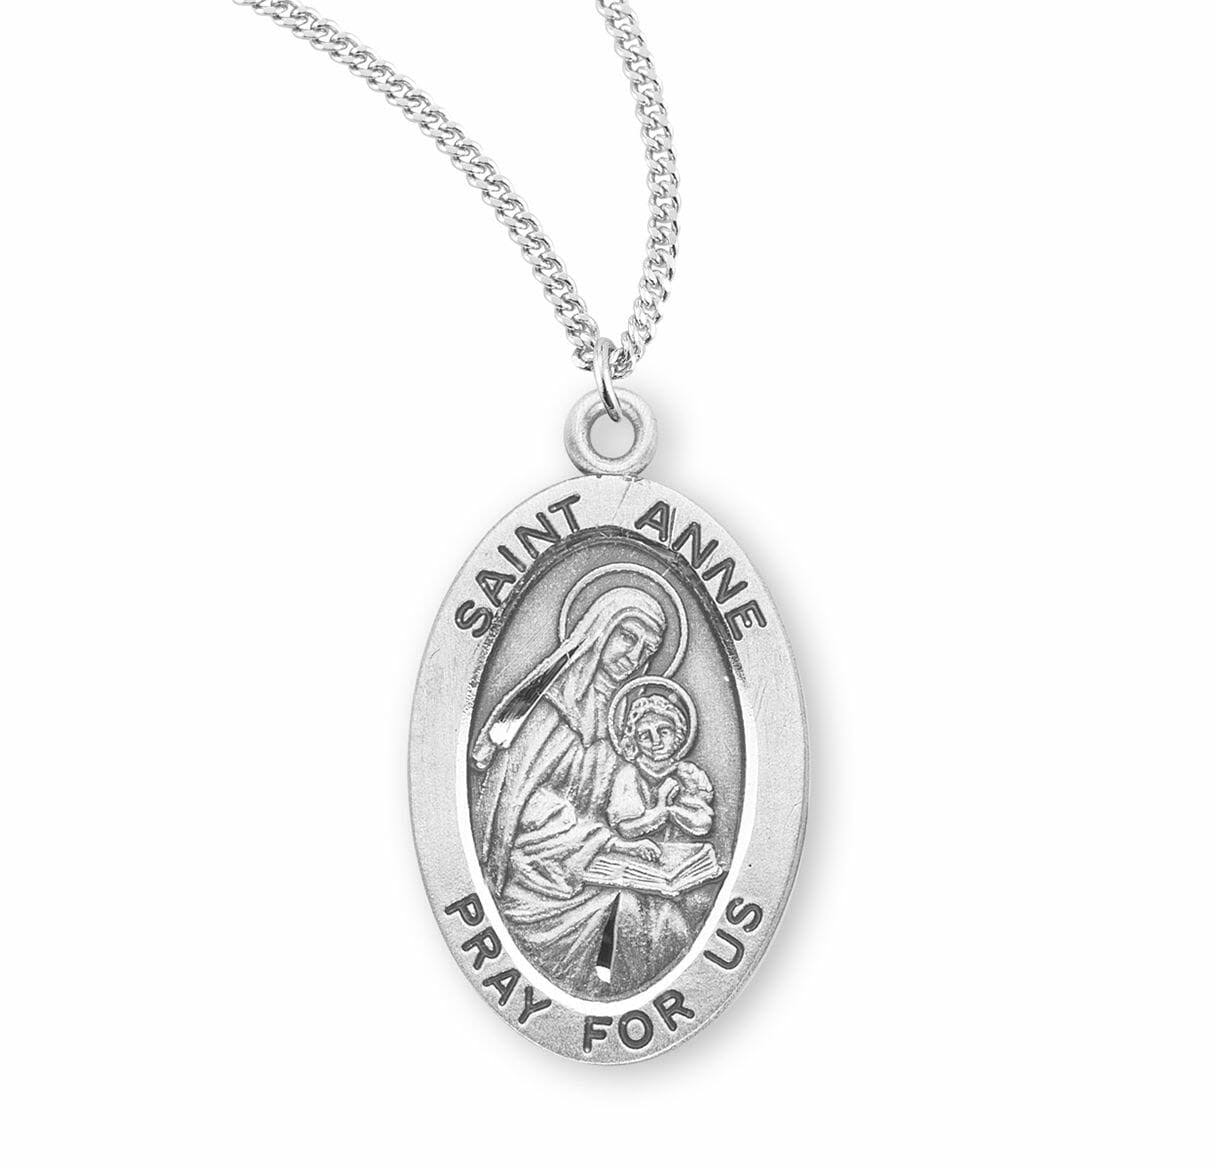 Sterling Silver Oval Miraculous Medal